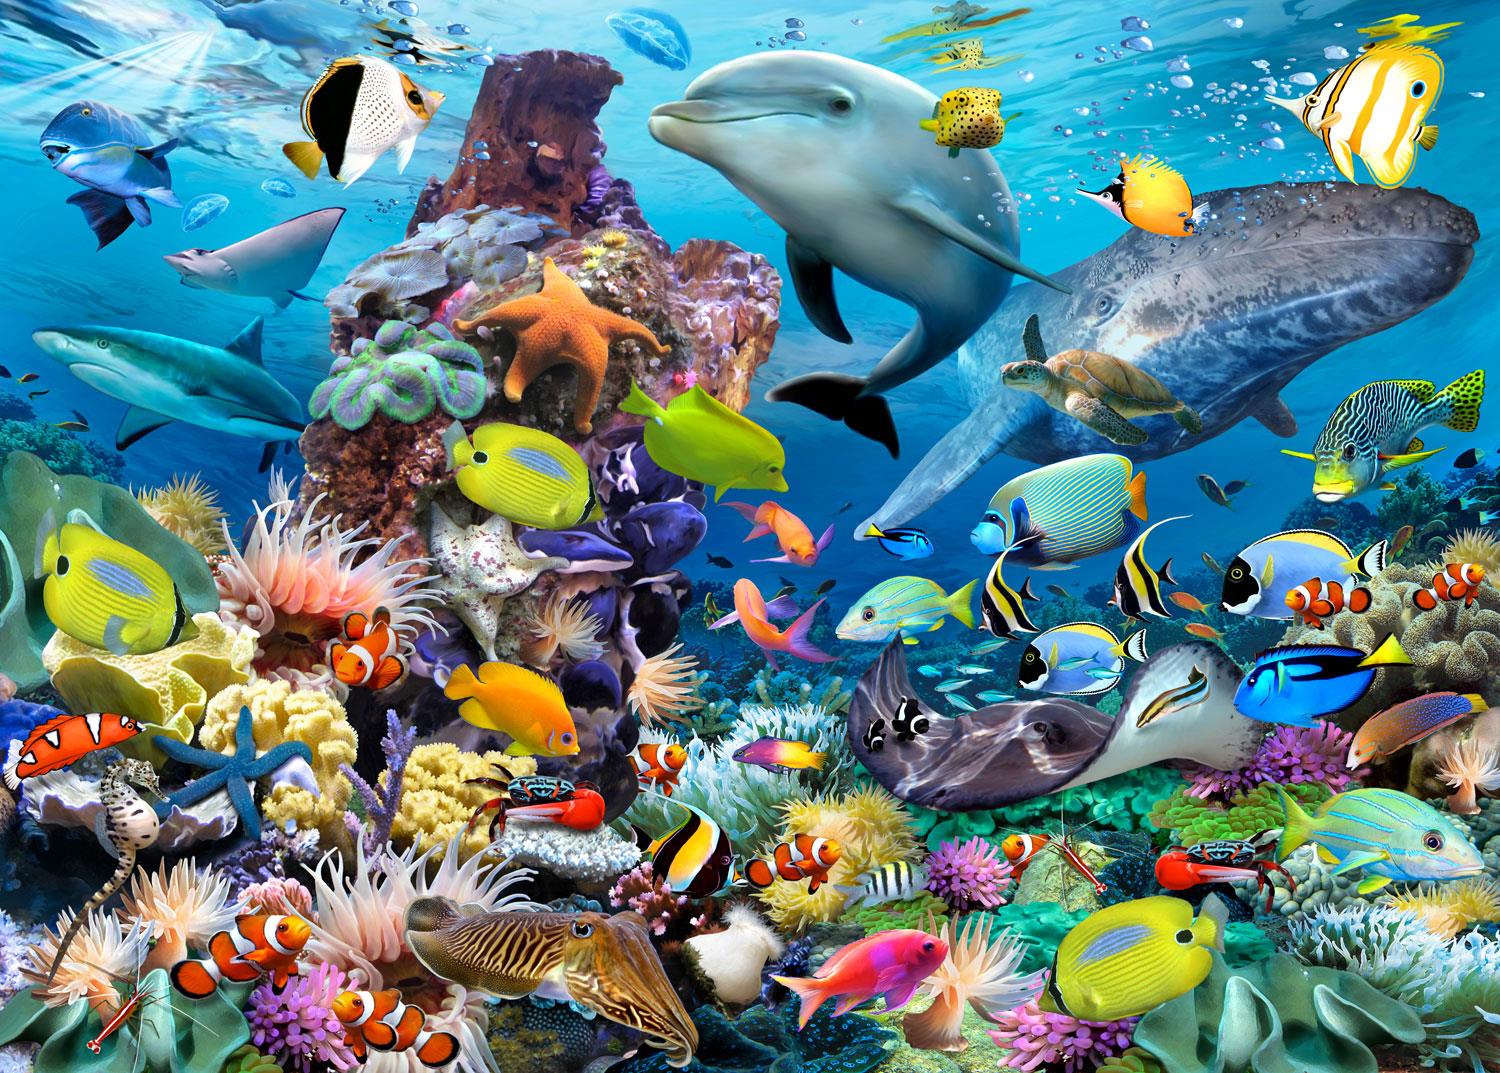 Ravensburger Jewels of the Sea Jigsaw Puzzle (1000 Pieces)